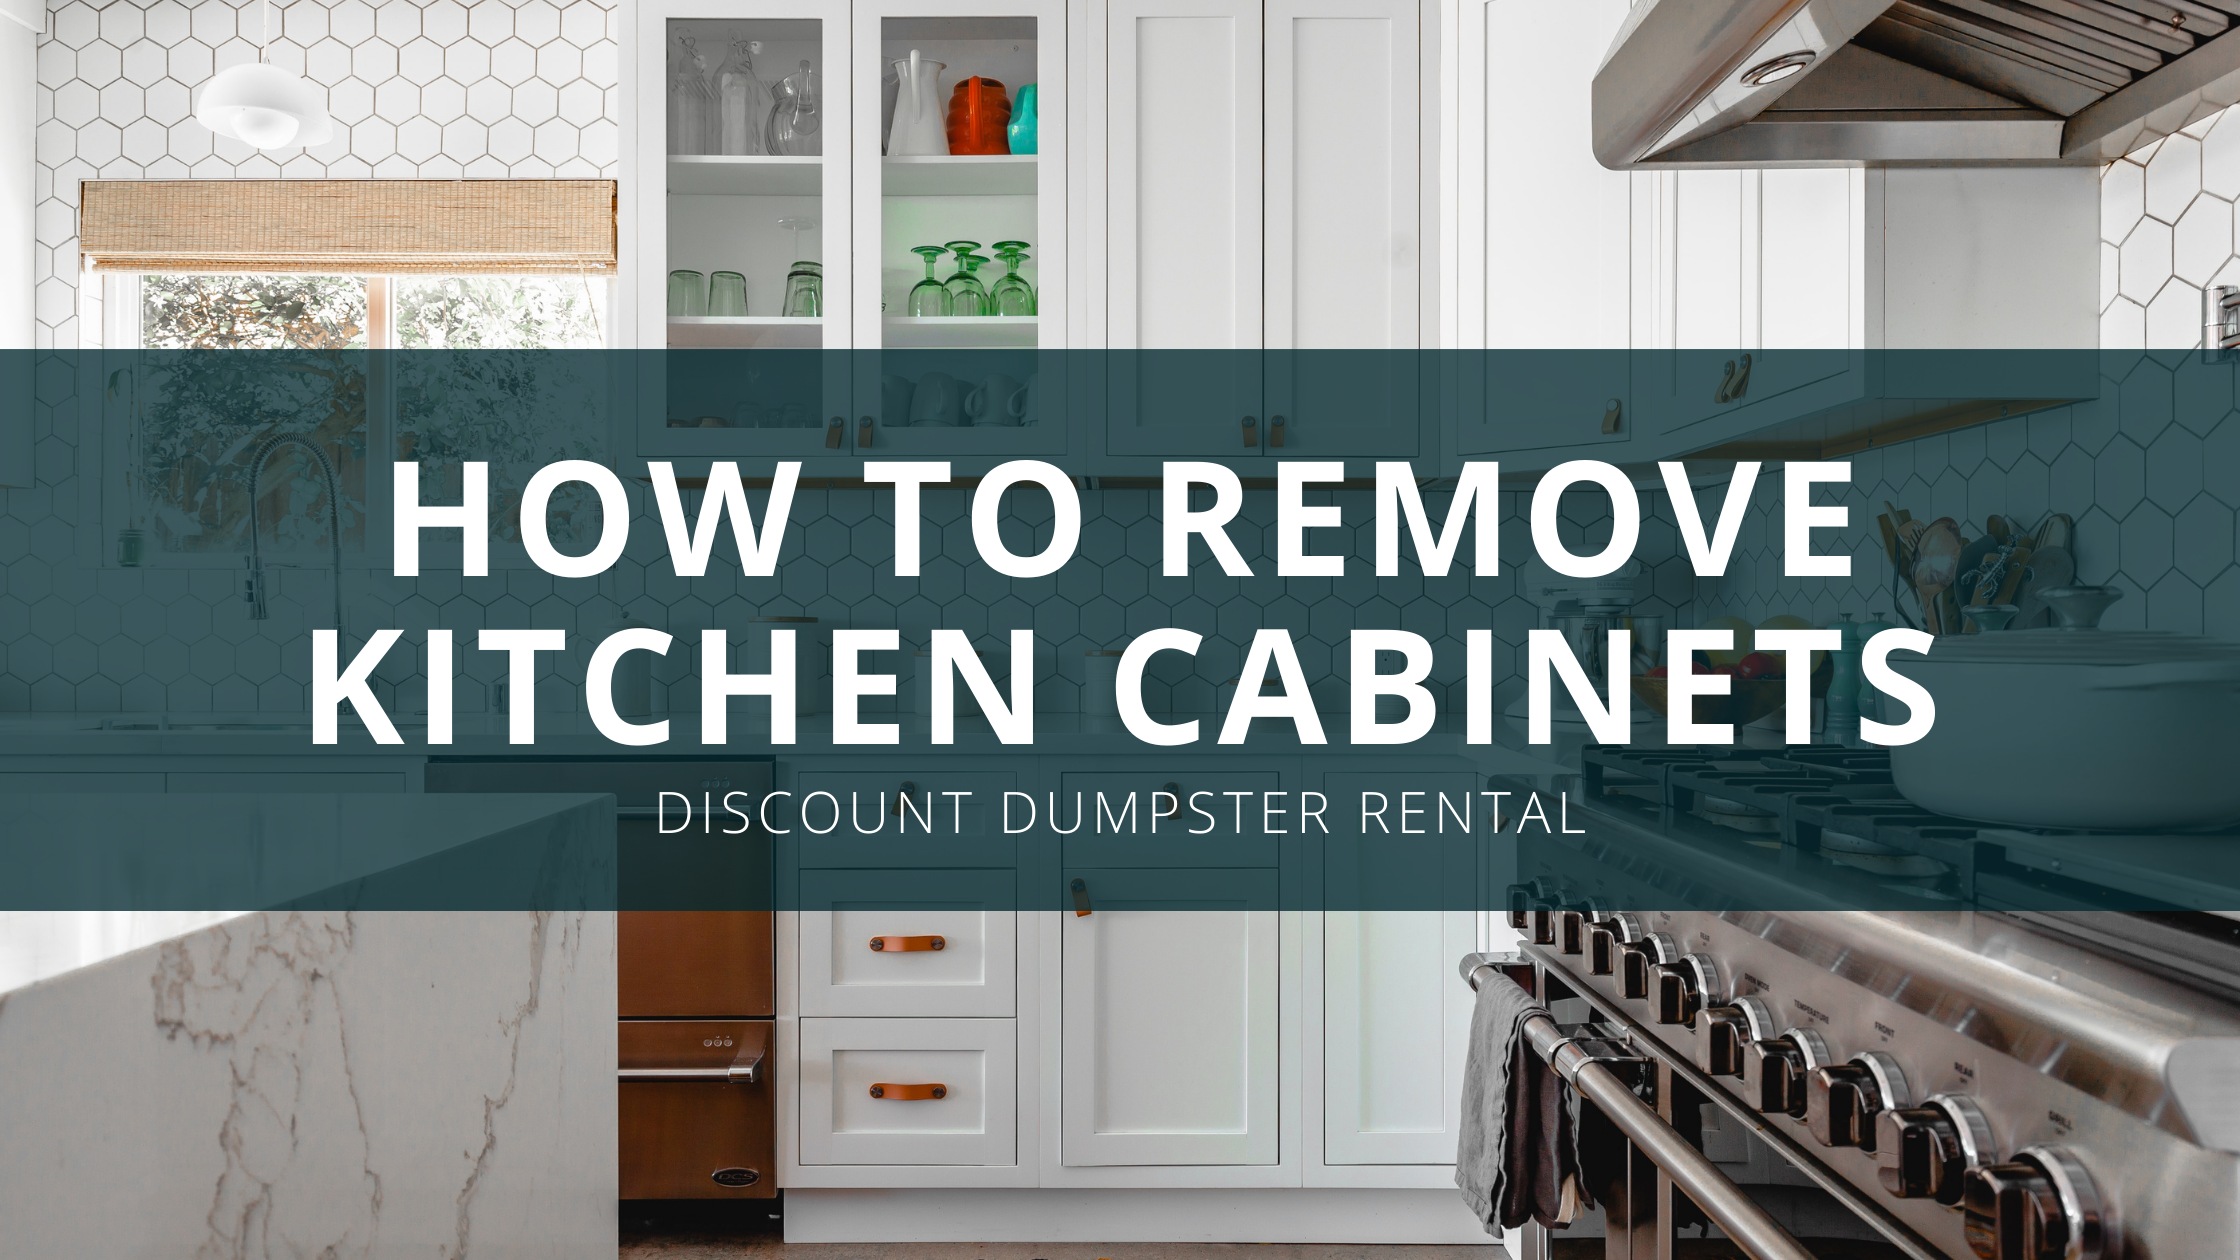 How To Remove Kitchen Cabinets Discount Dumpster Rental